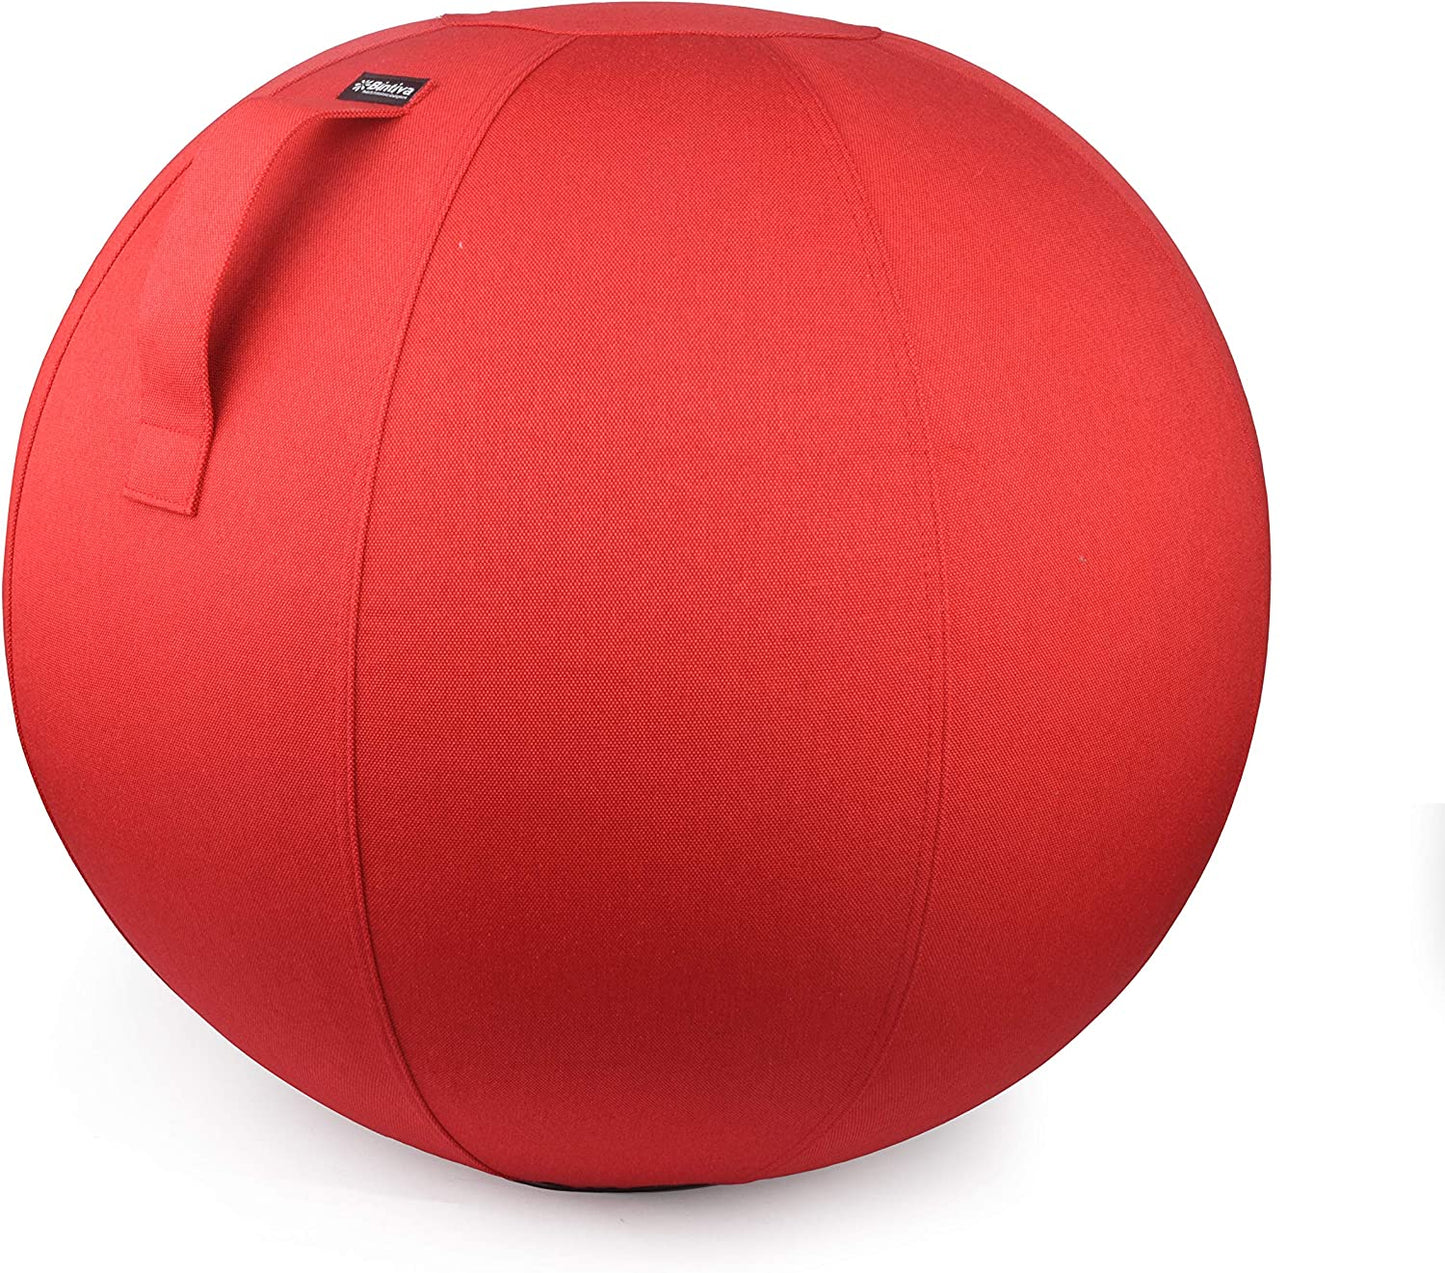 Stability Ball 65cm with Canvas Cover - (RED CRIMSON)